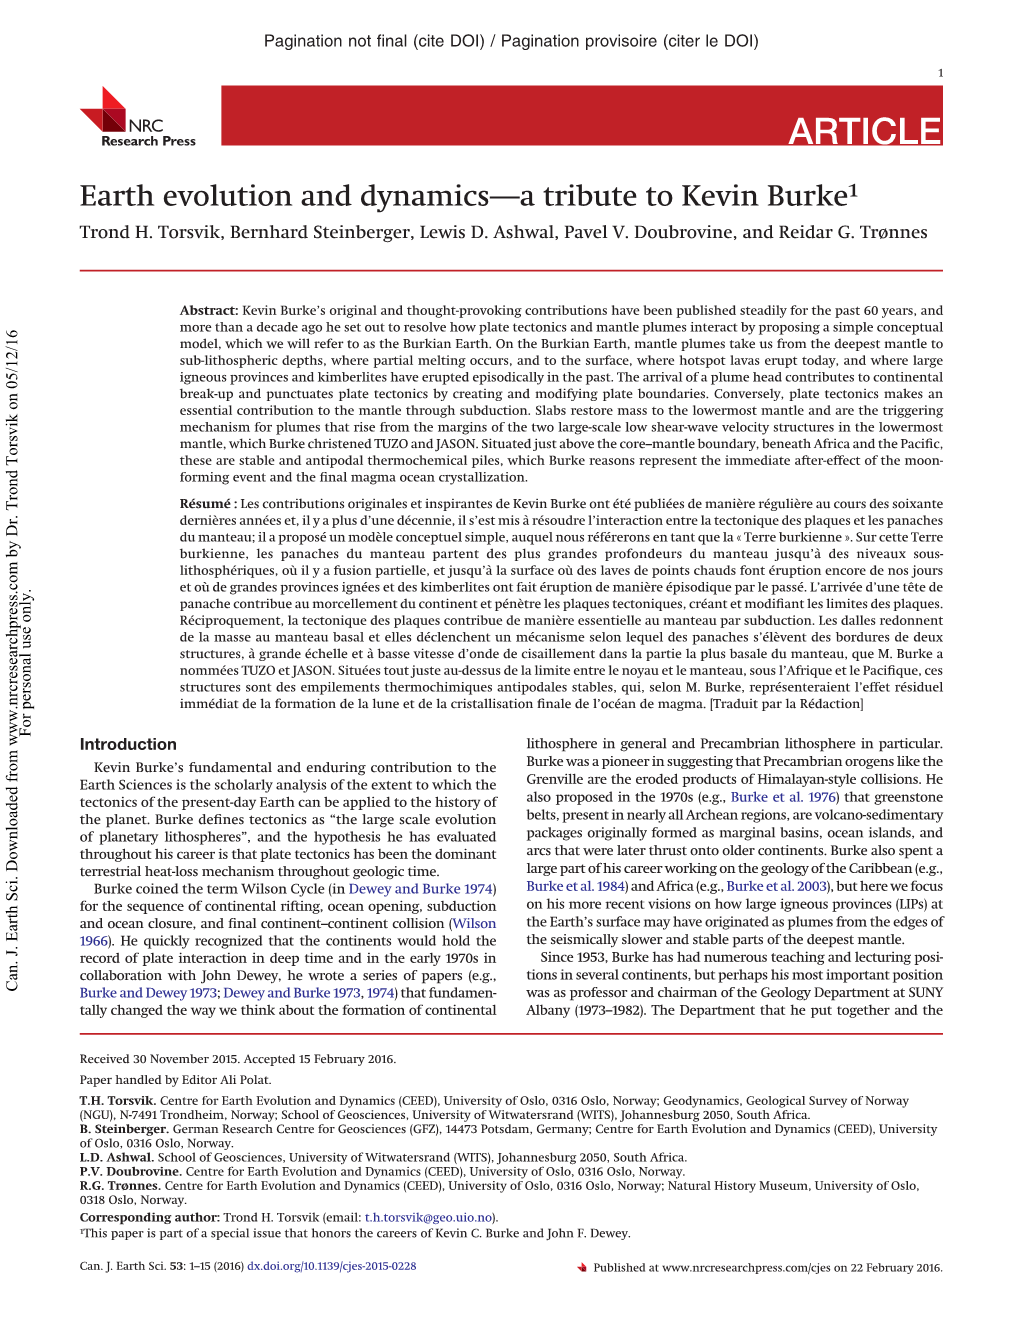 Earth Evolution and Dynamics—A Tribute to Kevin Burke1 Trond H